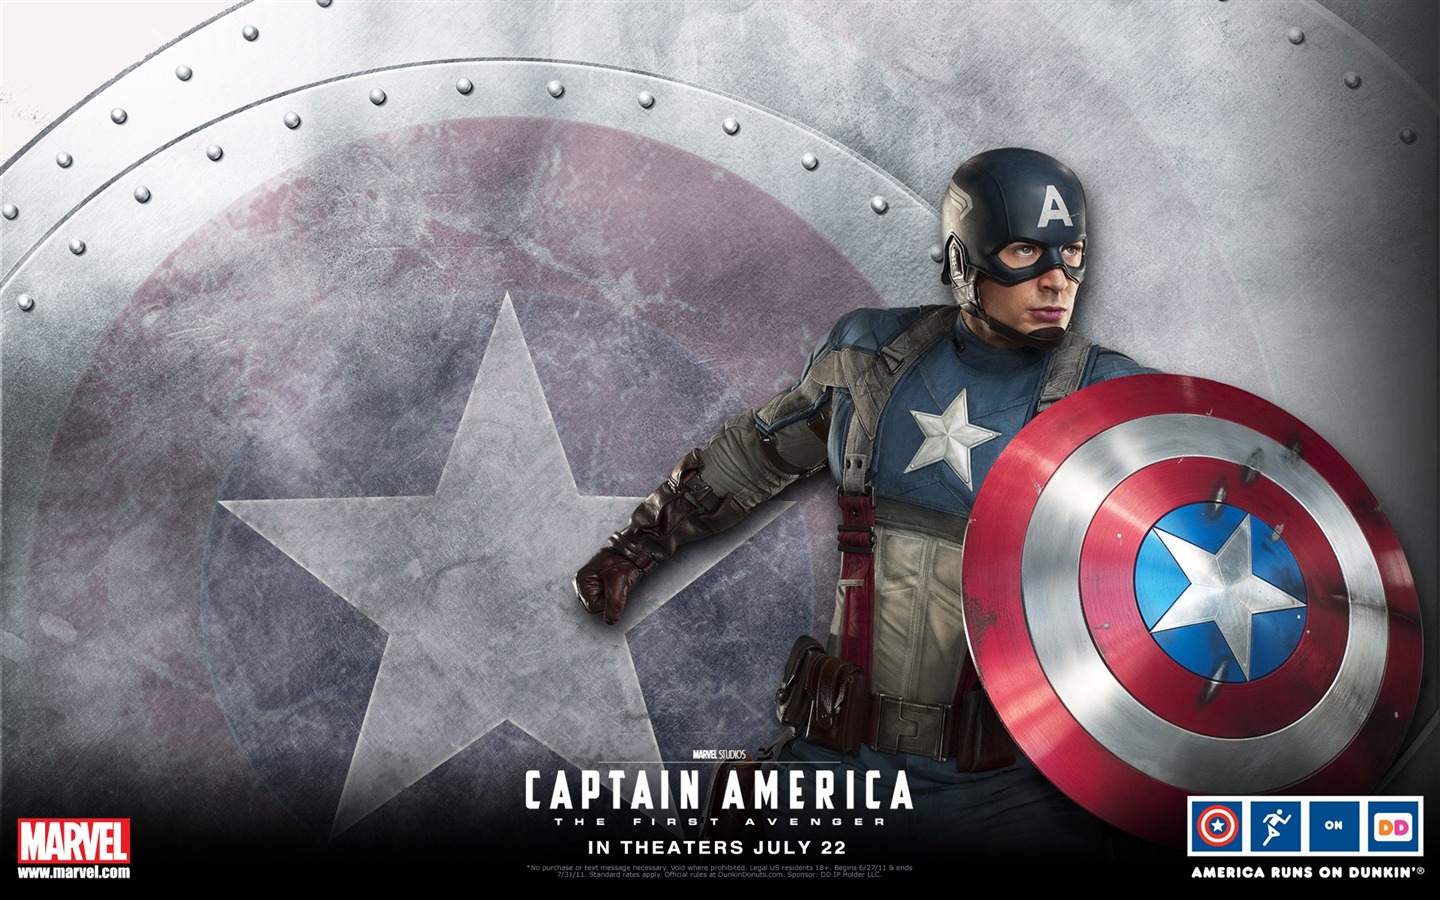 Captain America: The First Avenger wallpapers HD #6 - 1440x900